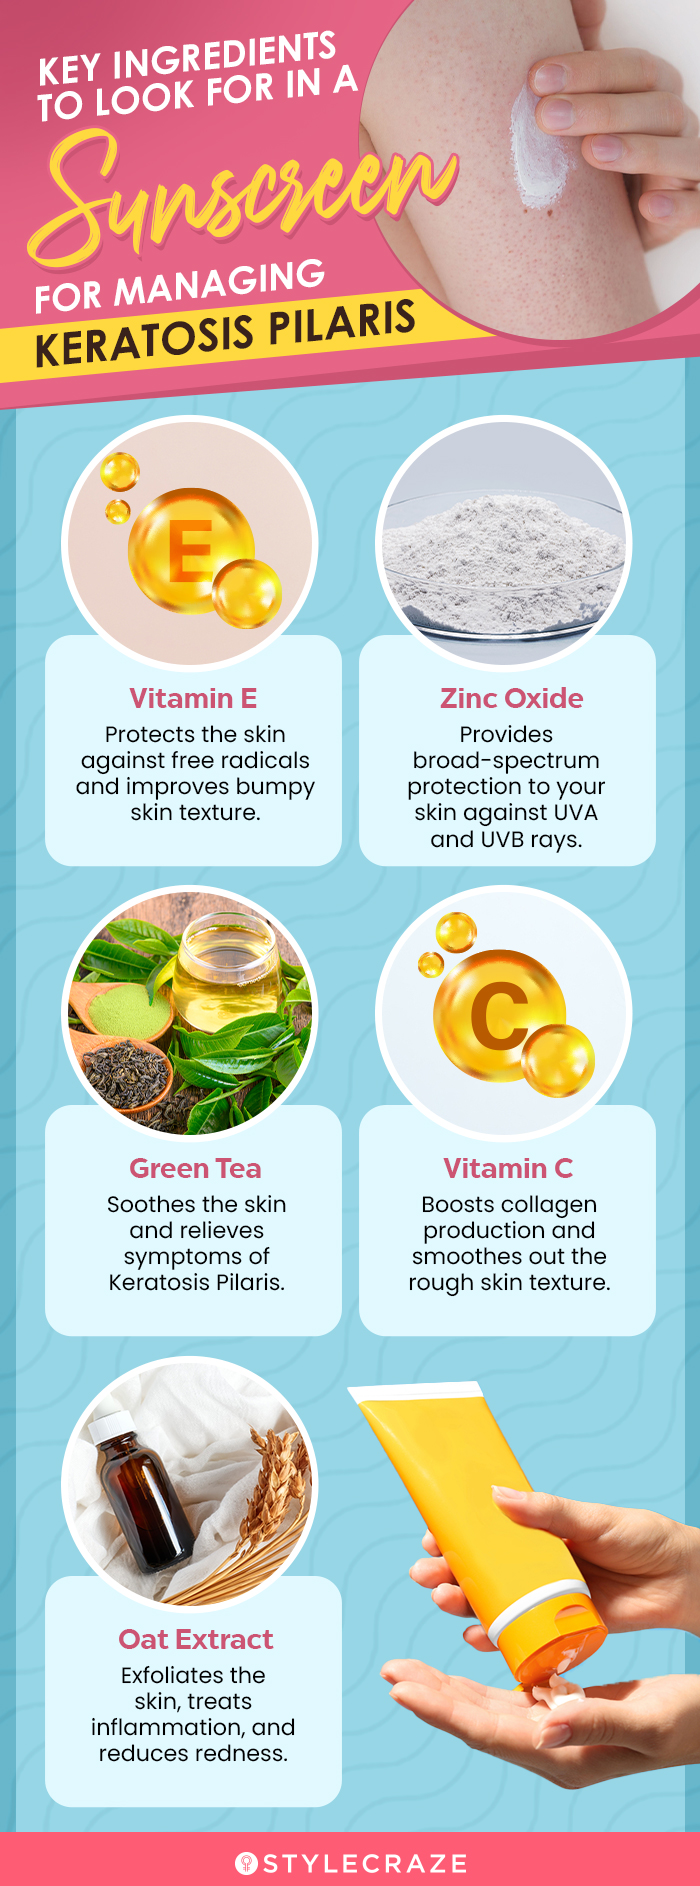 Key Ingredients To Look For In A Sunscreen For Managing Keratosis Pilaris (infographic)